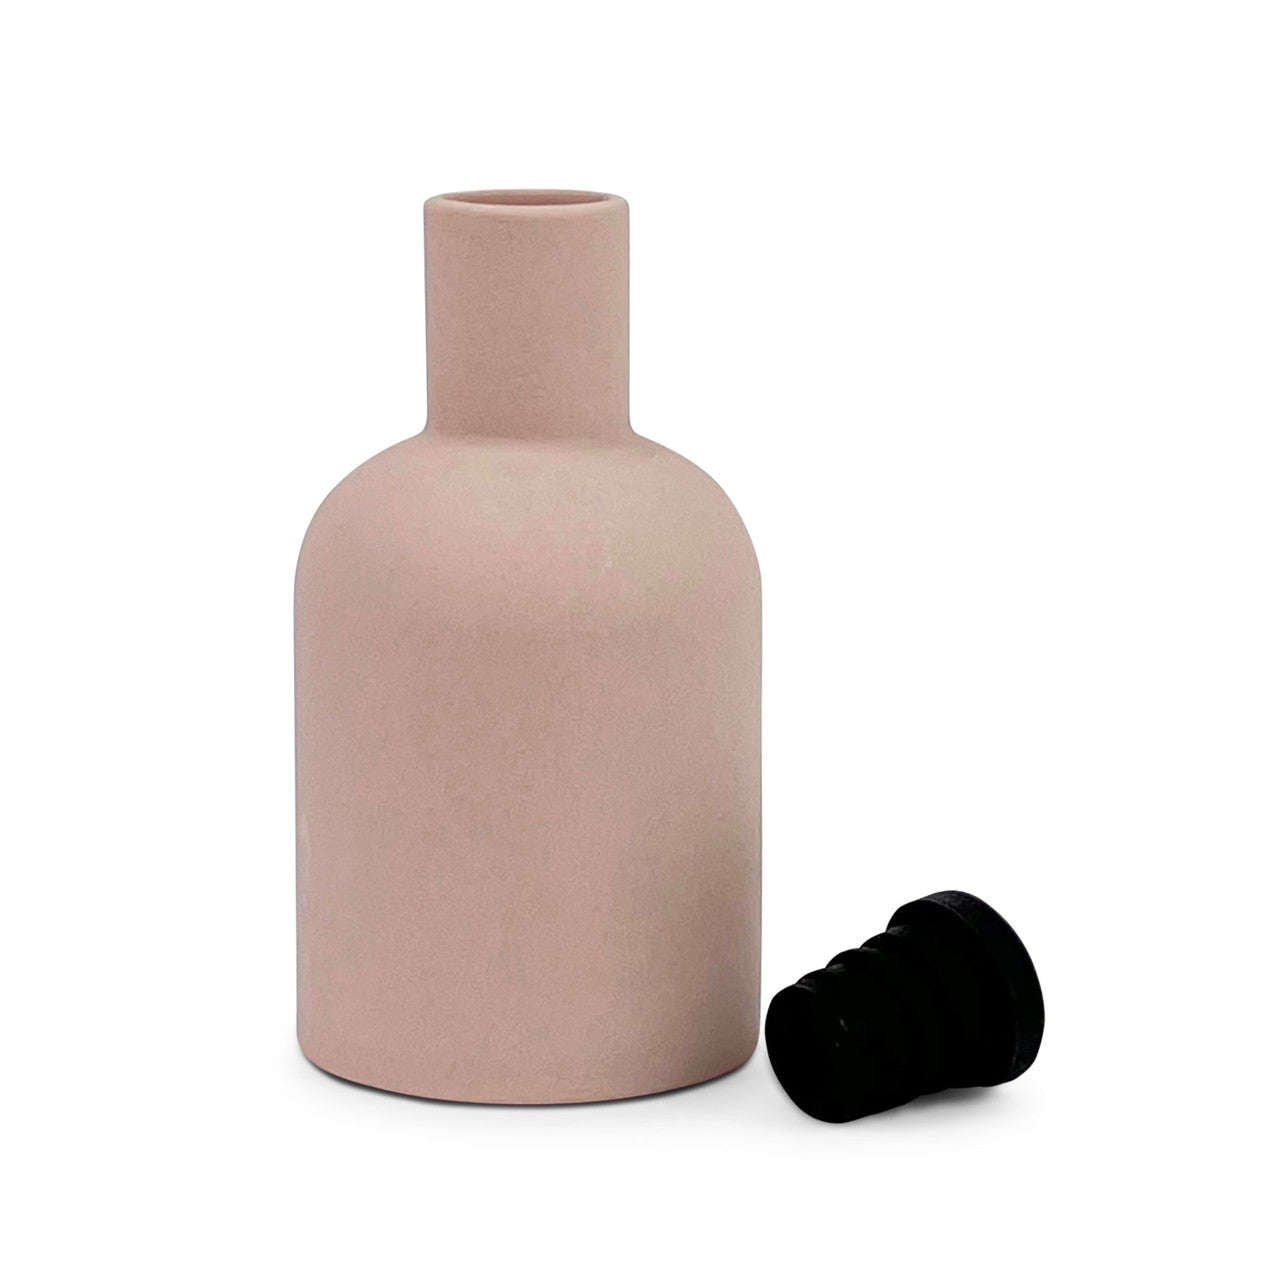 Ceramic Bottle for Diffusers - Pale Pink